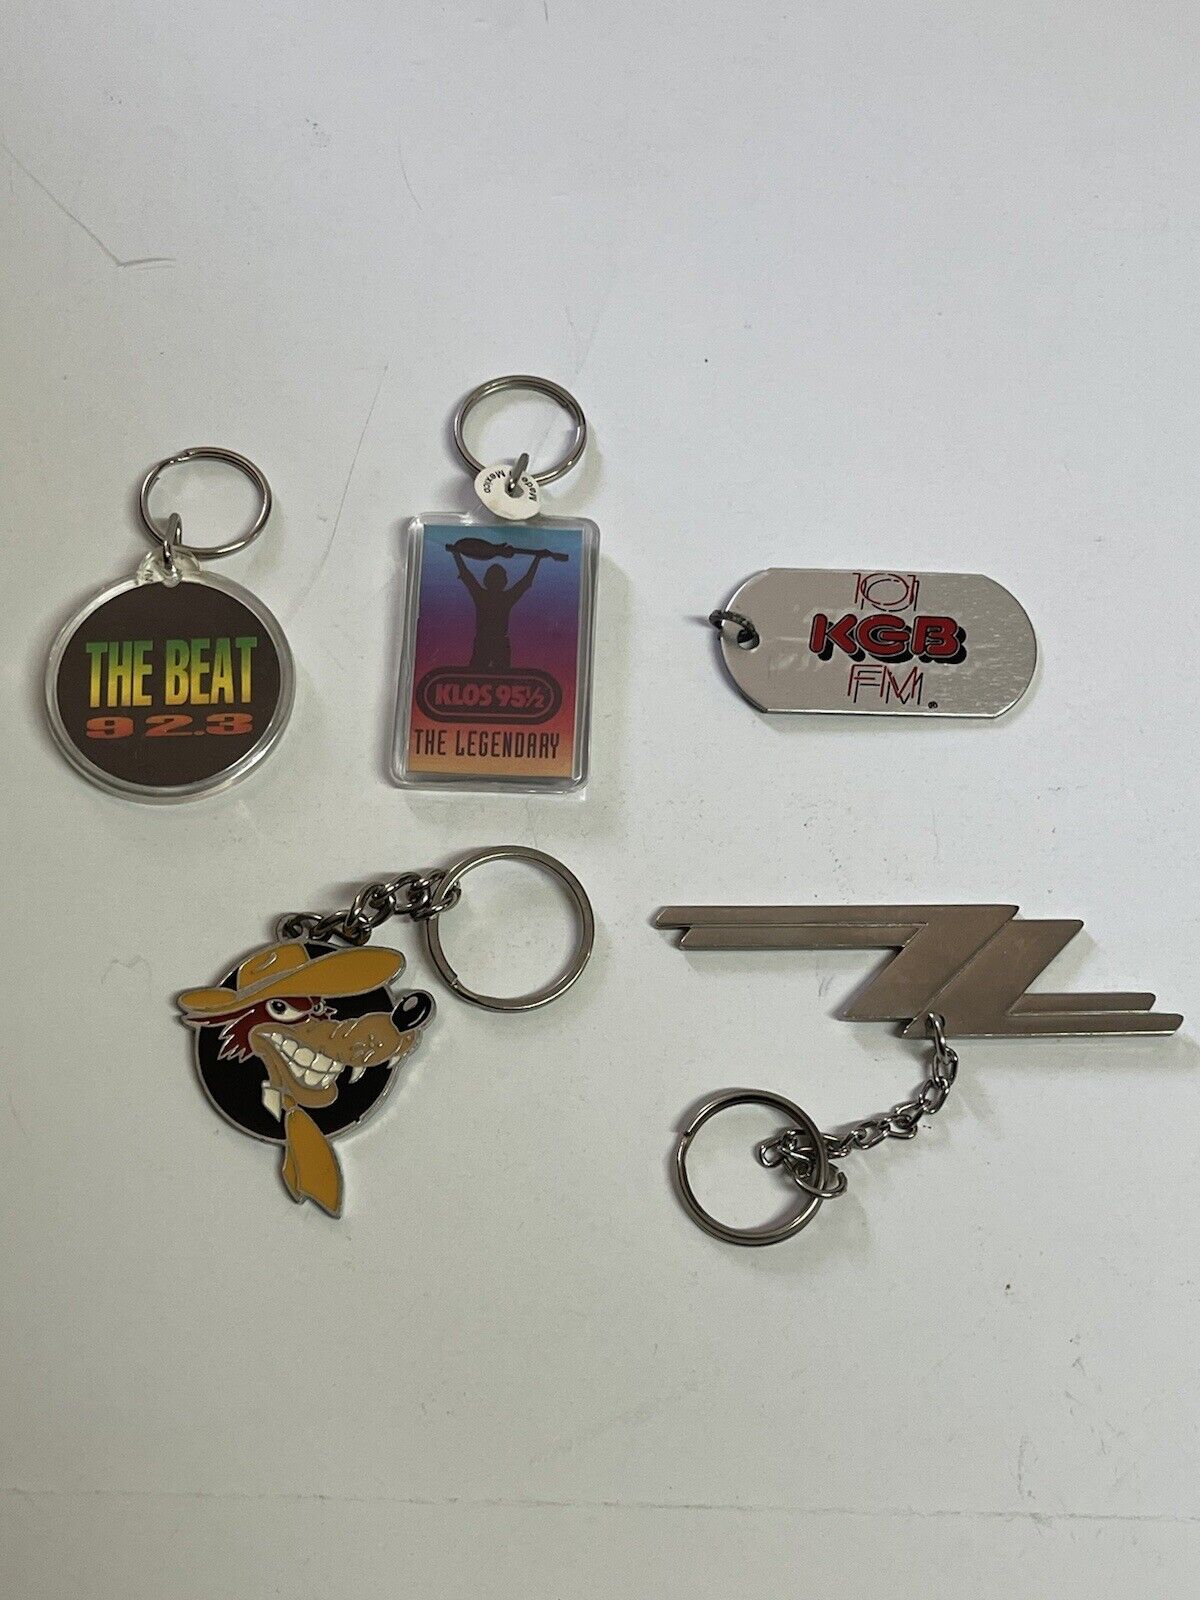 Music Station/ Bands Keychains Lot of 5, ZZ Top, KGB, KLOS, The Beat, VINTAGE